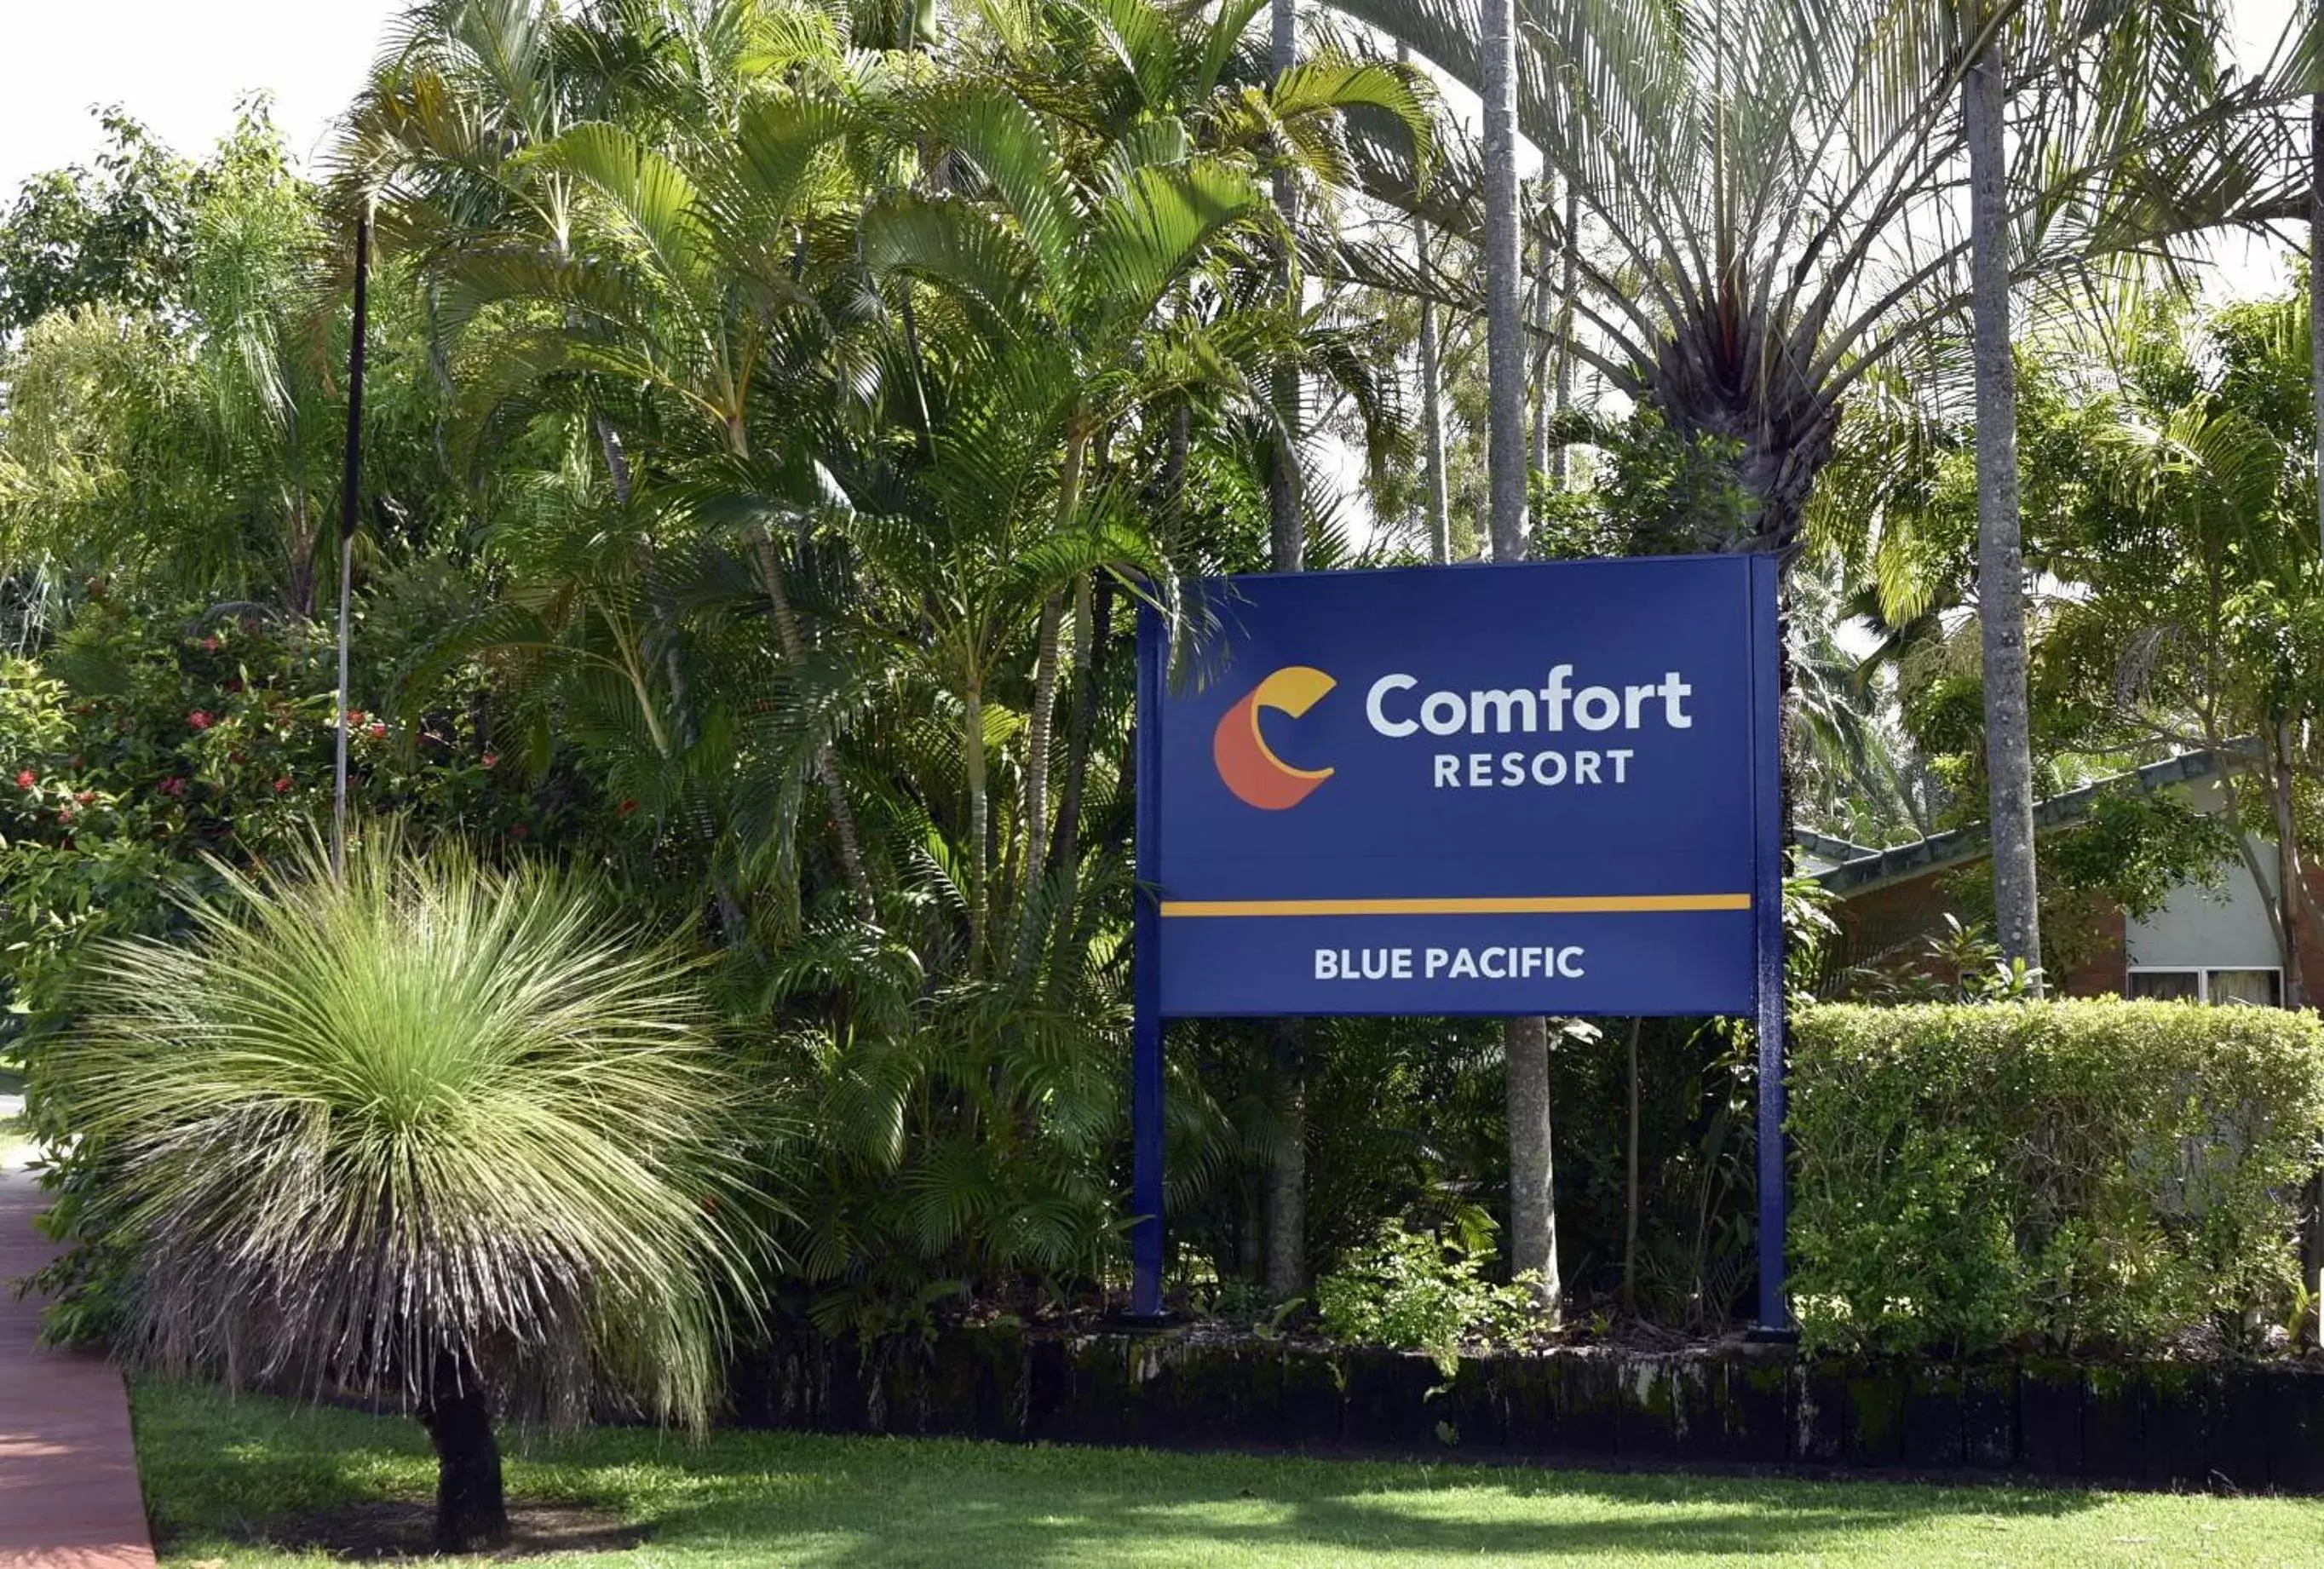 Property logo or sign in Comfort Resort Blue Pacific